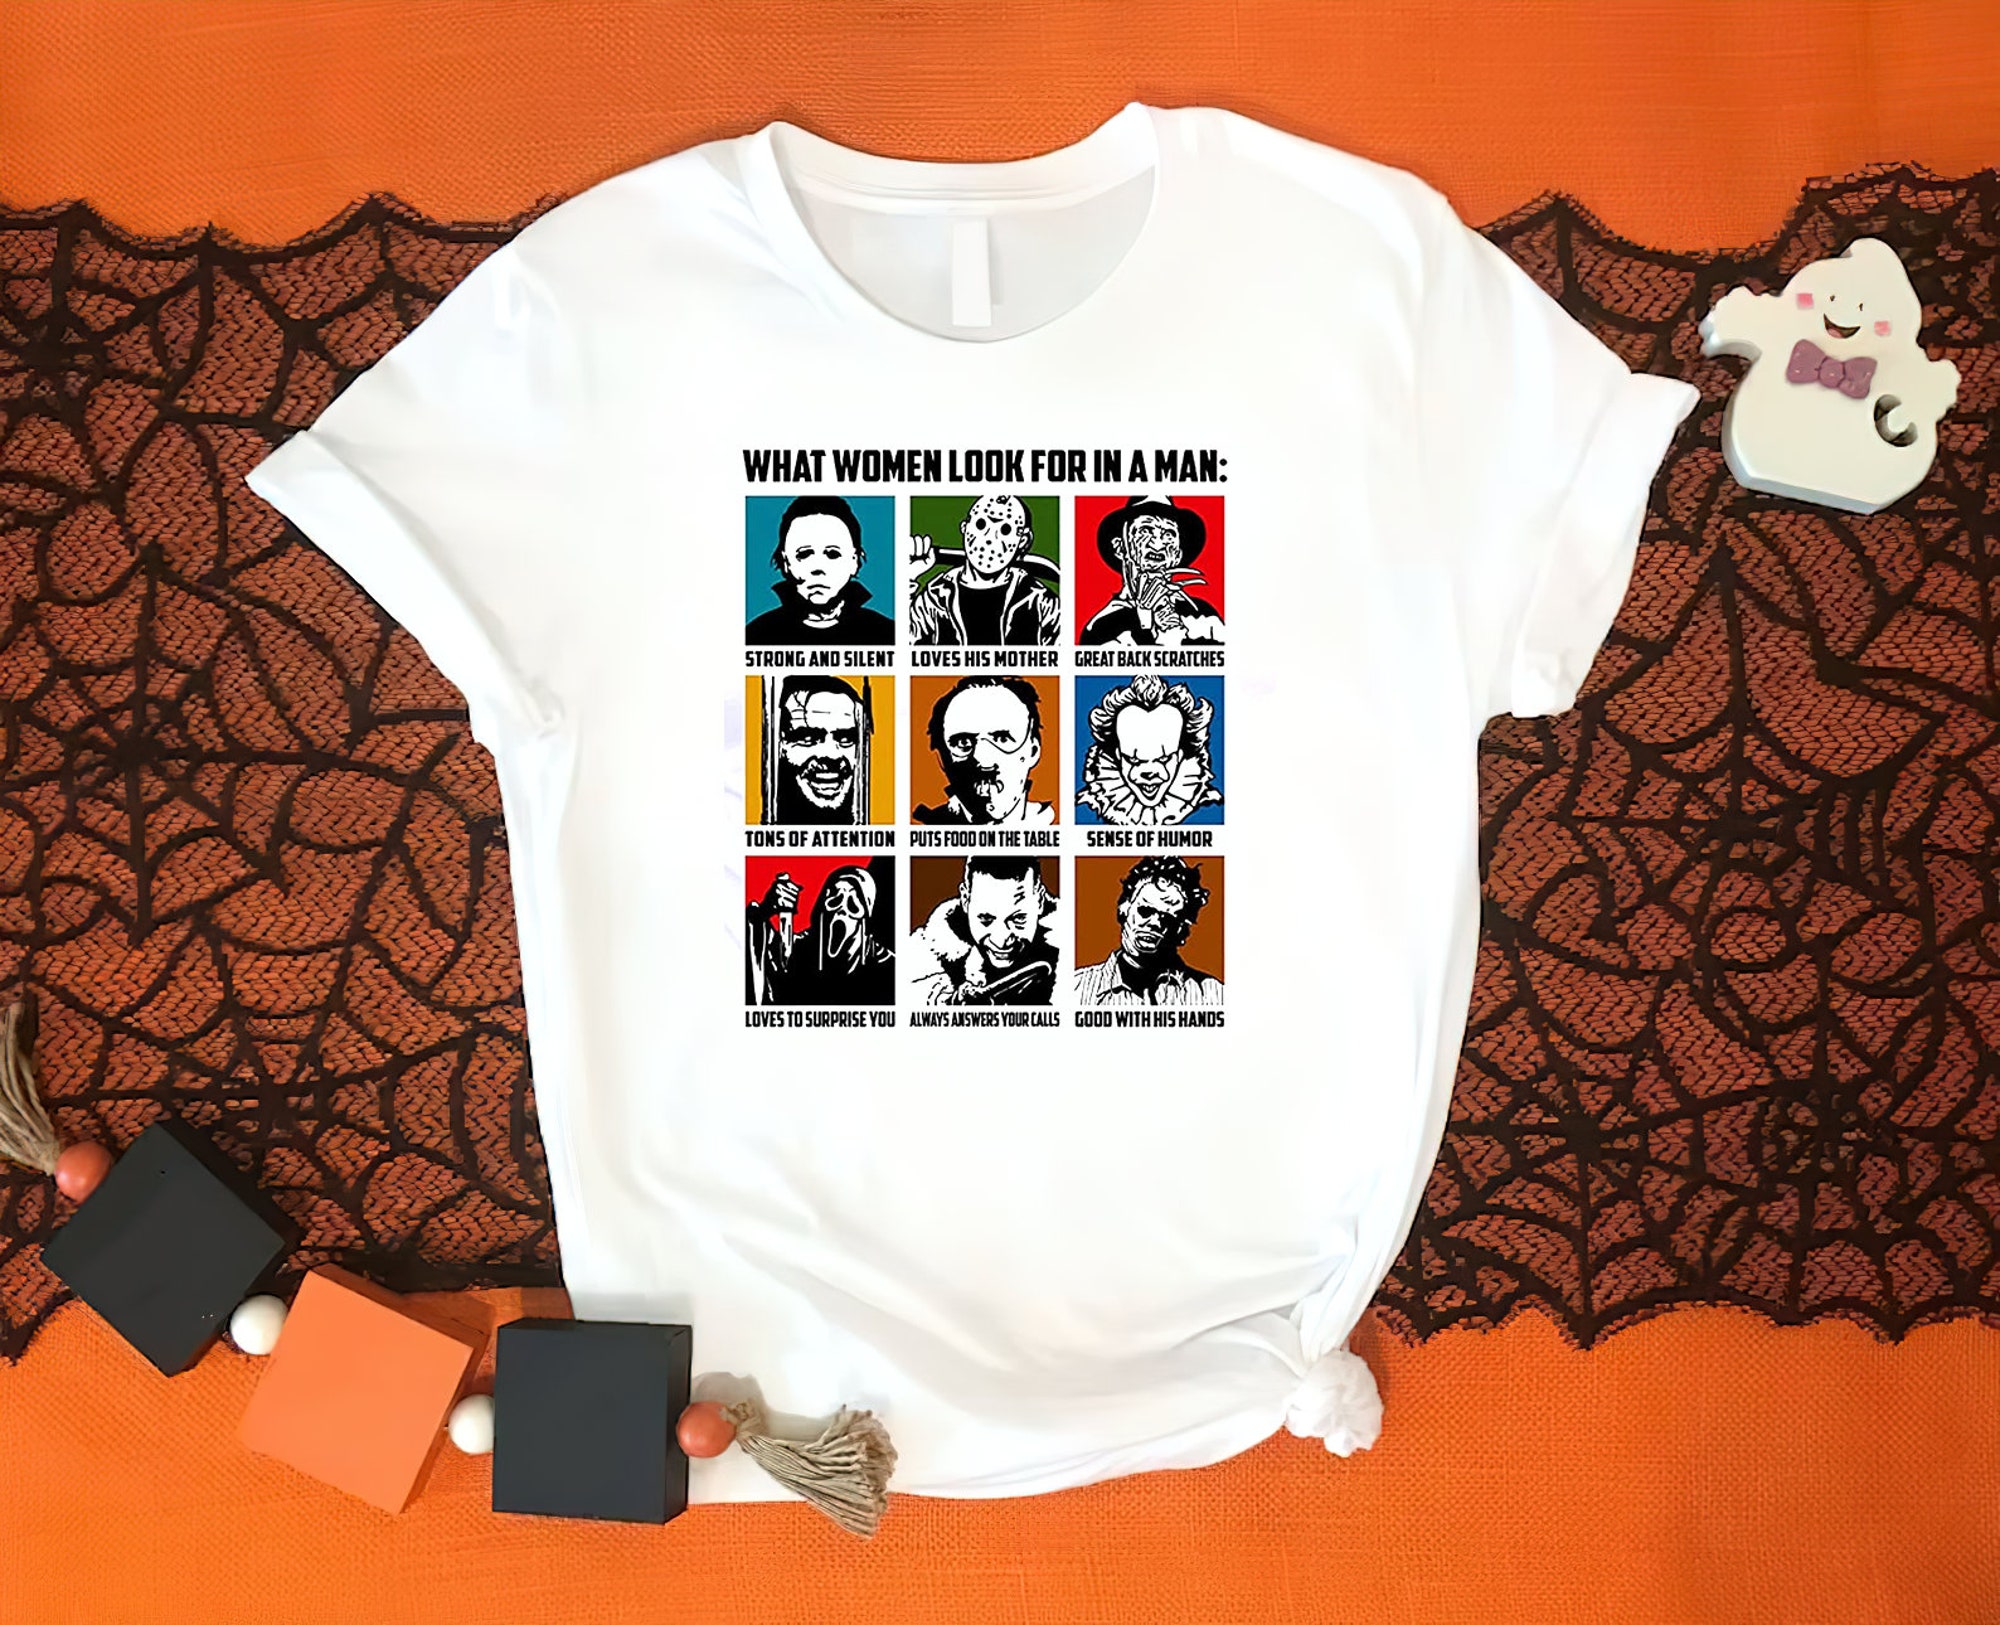 Friends Shirt With Horror Movie Characters, Horror Friends